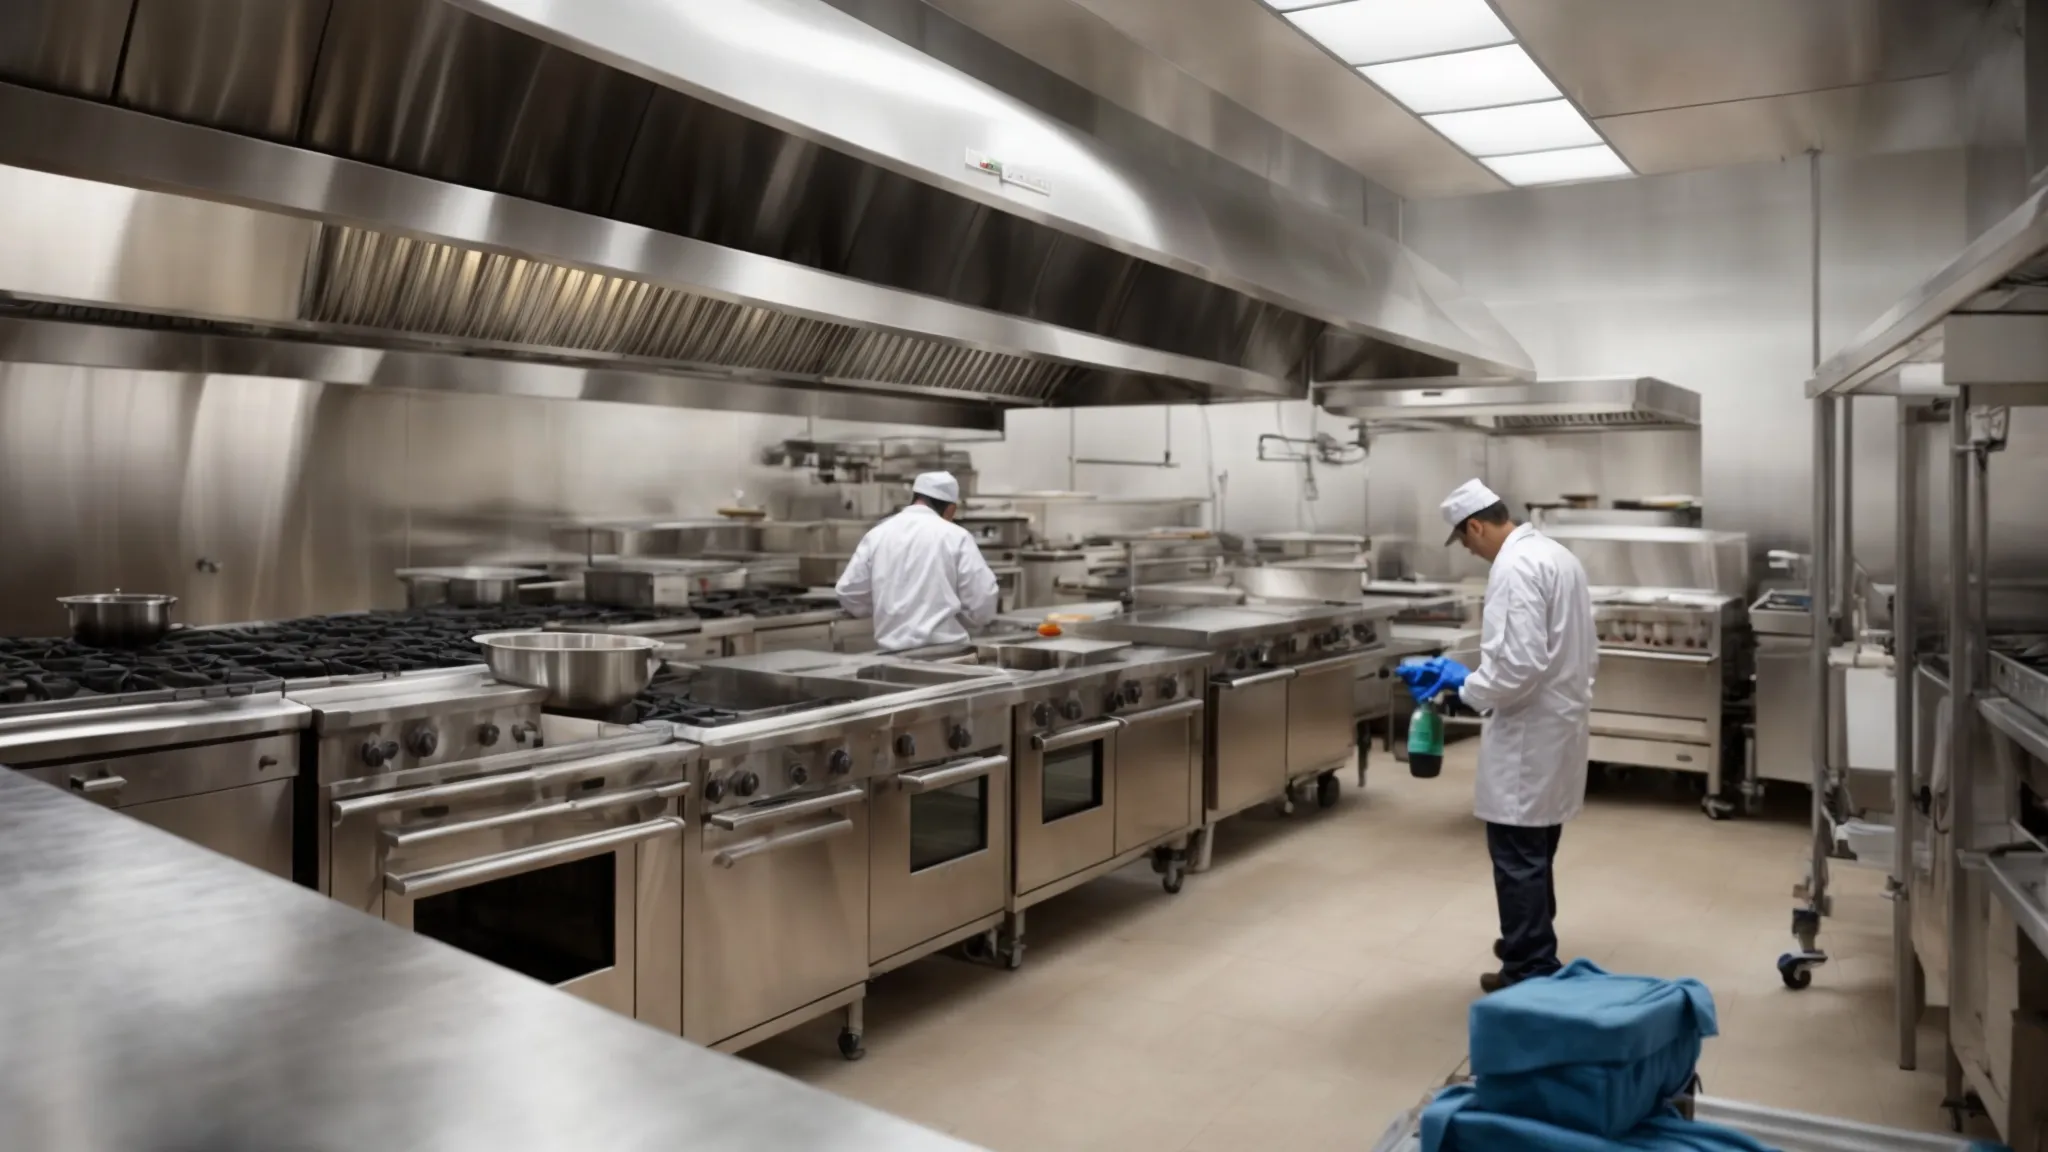 a team from north york hood cleaning efficiently works in a spacious commercial kitchen, meticulously cleaning a large stainless steel exhaust hood over professional cooking ranges.